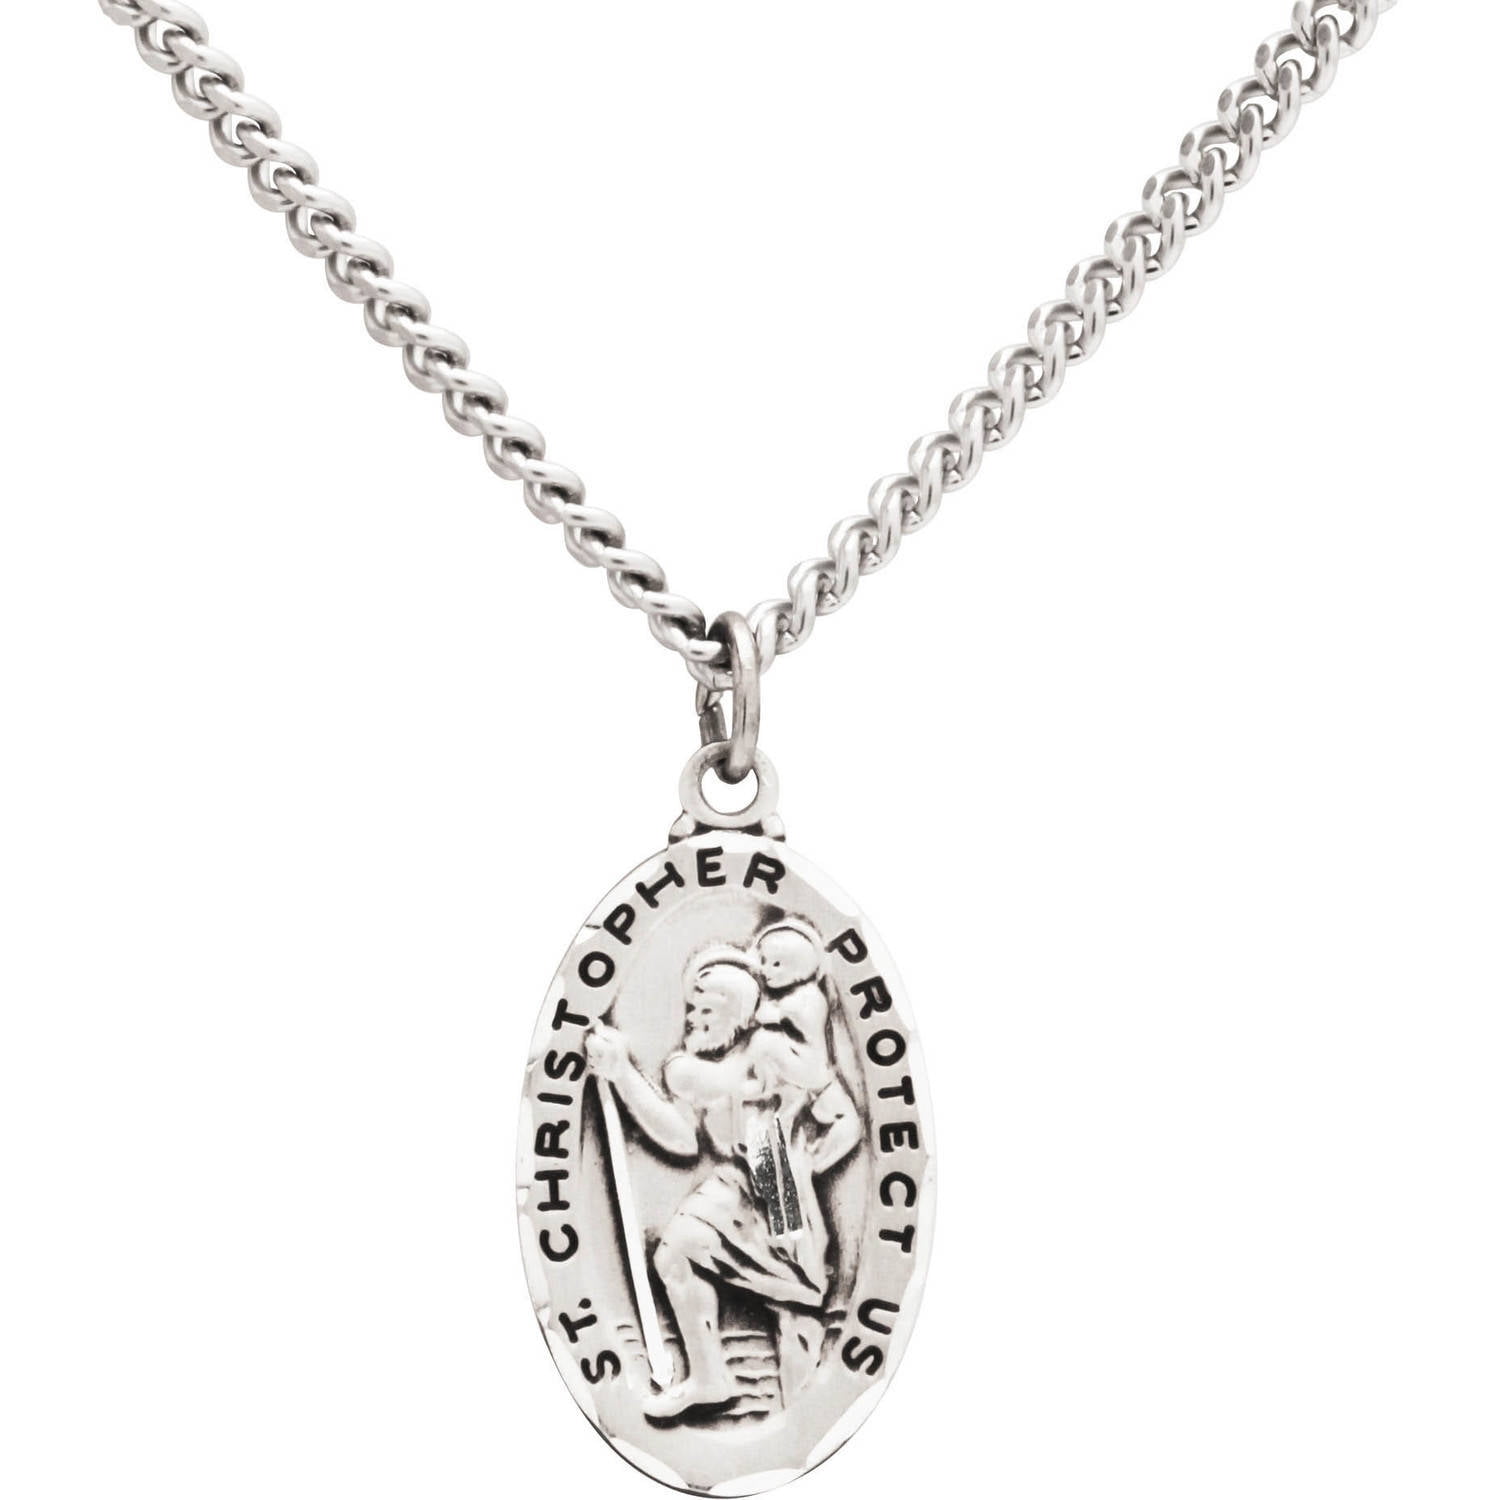 Jewel Tie Sterling Silver St Christopher Medal 0.91 in x 0.59 in